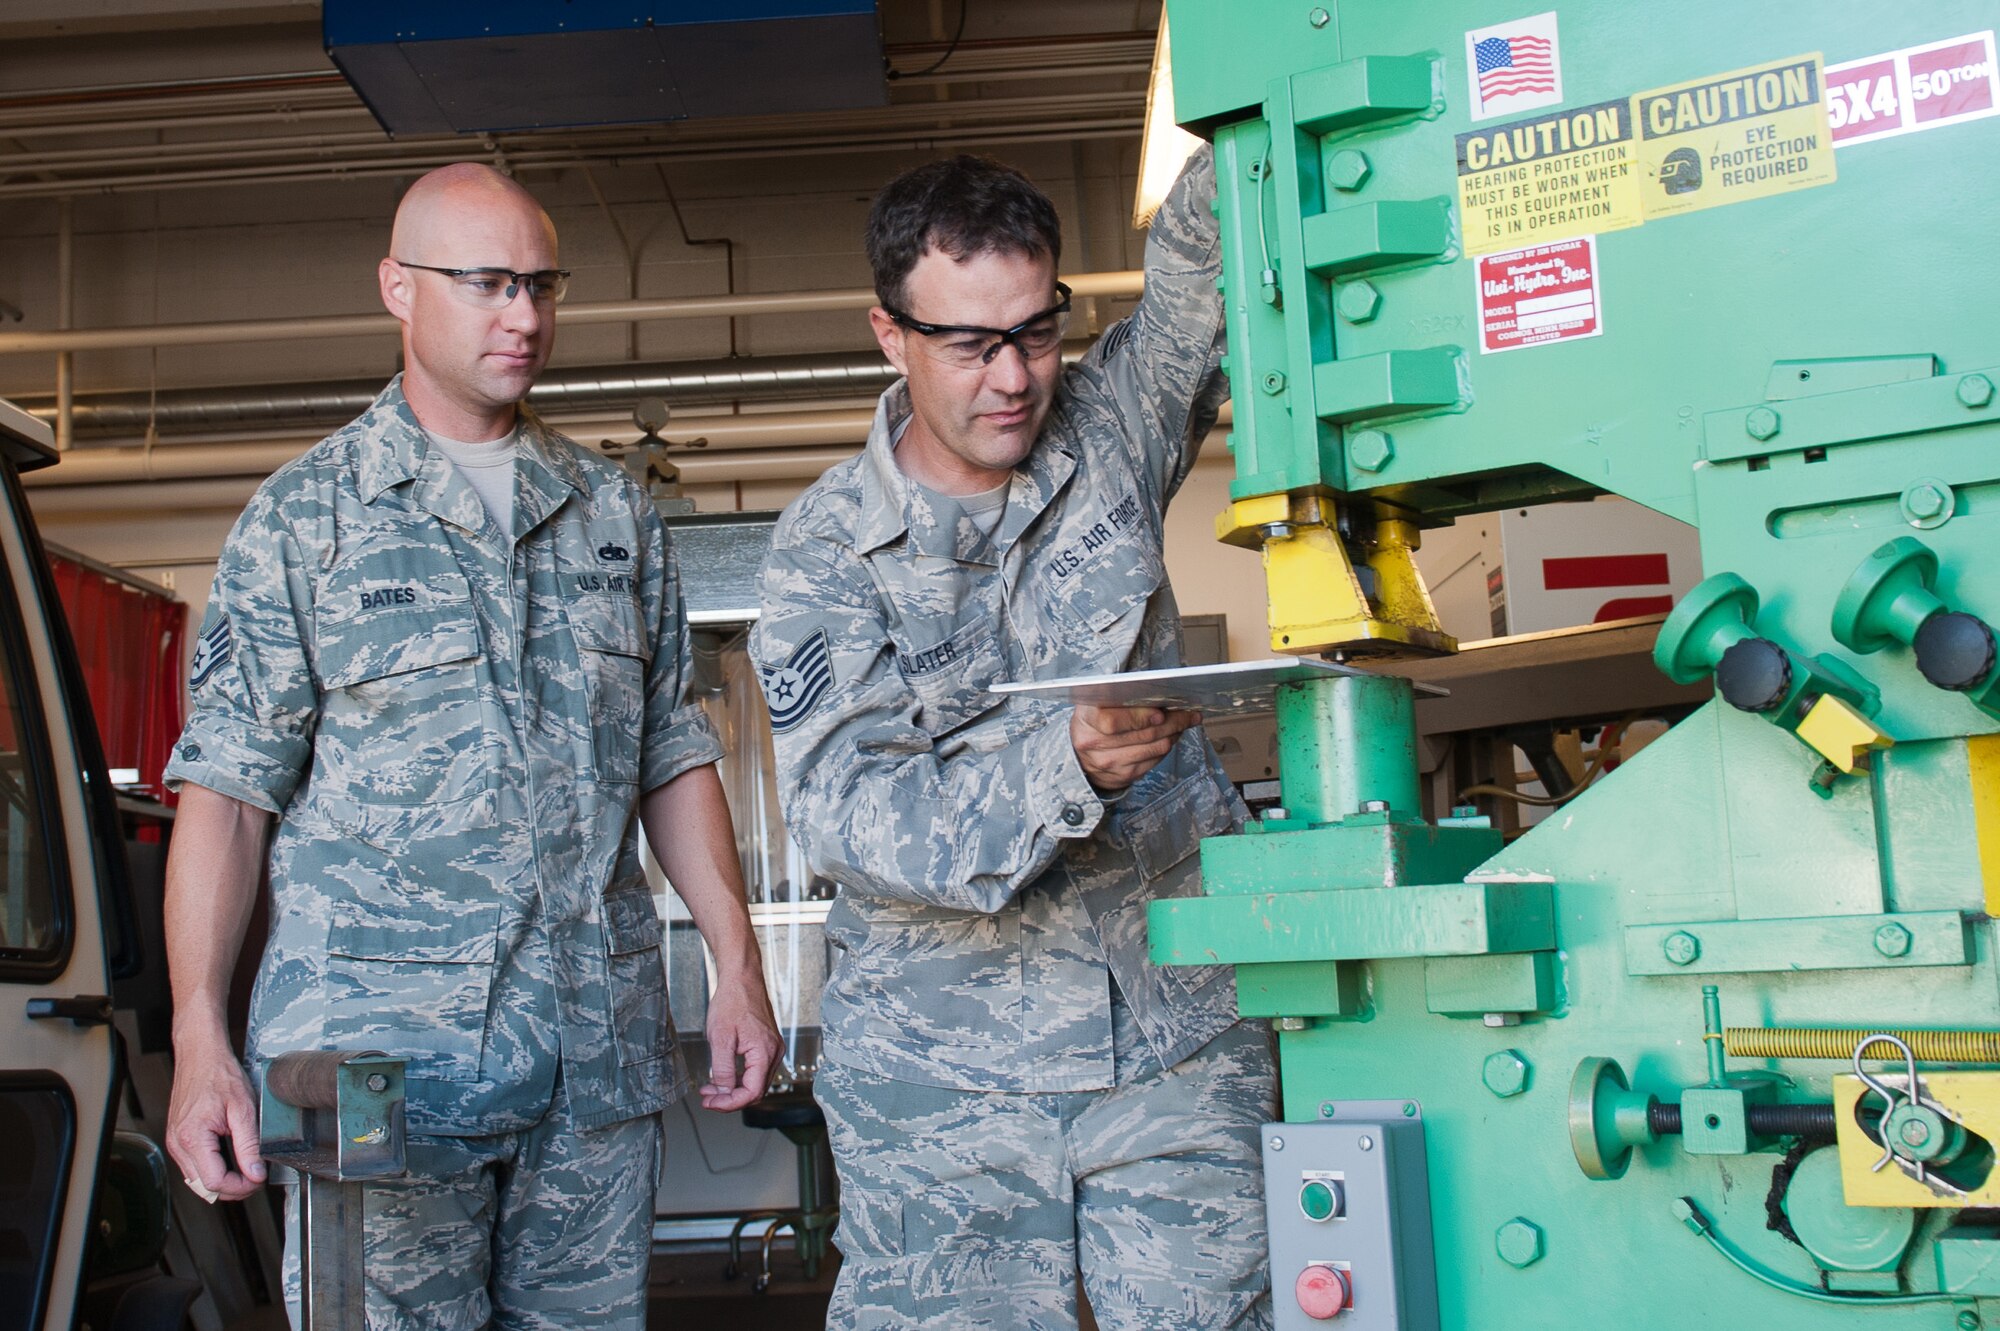 The 12th annual Toy Show, during Family Day Sept. 9 at Gowen Field, will showcase the hobbies and interests of Idaho Air National Guard Members. Staff Sgt. Phil Bates (left) and Tech Sgt. Greg Slater, both machinists in the 124th Maintenance Squadron's Metals Technology shop, and gearheads in their free time, have helped coordinate the Toy Show since its beginning.